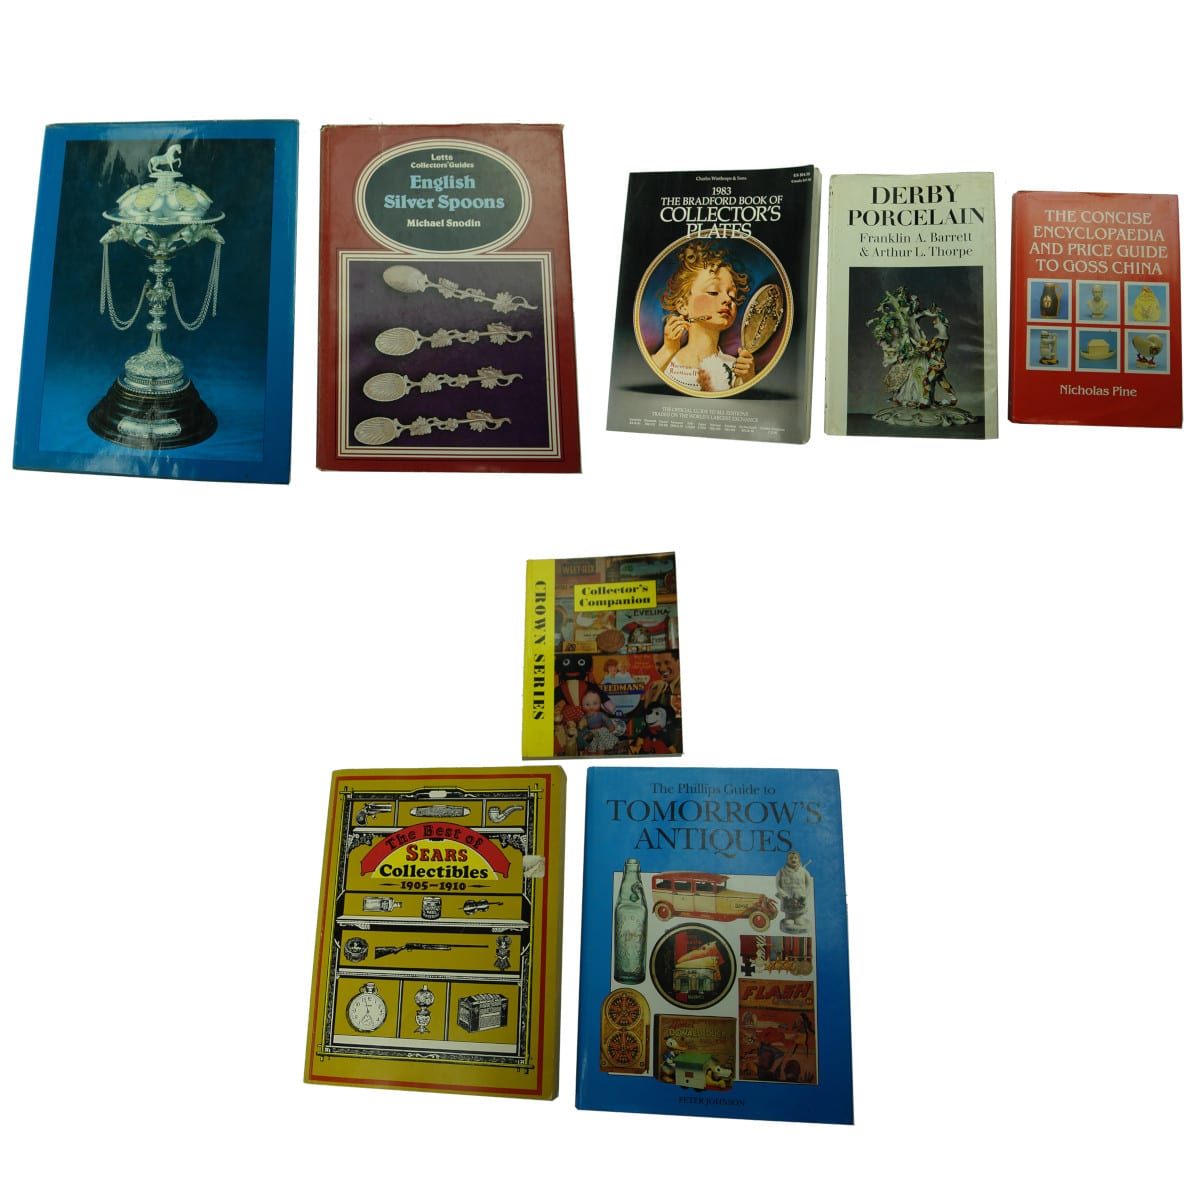 6 Collectors Books: Australian Silver; English Spoons; Collectors Plates; Derby Porcelain; Goss China; Collectors Companion; Sears Collectibles; Phillips Guide.